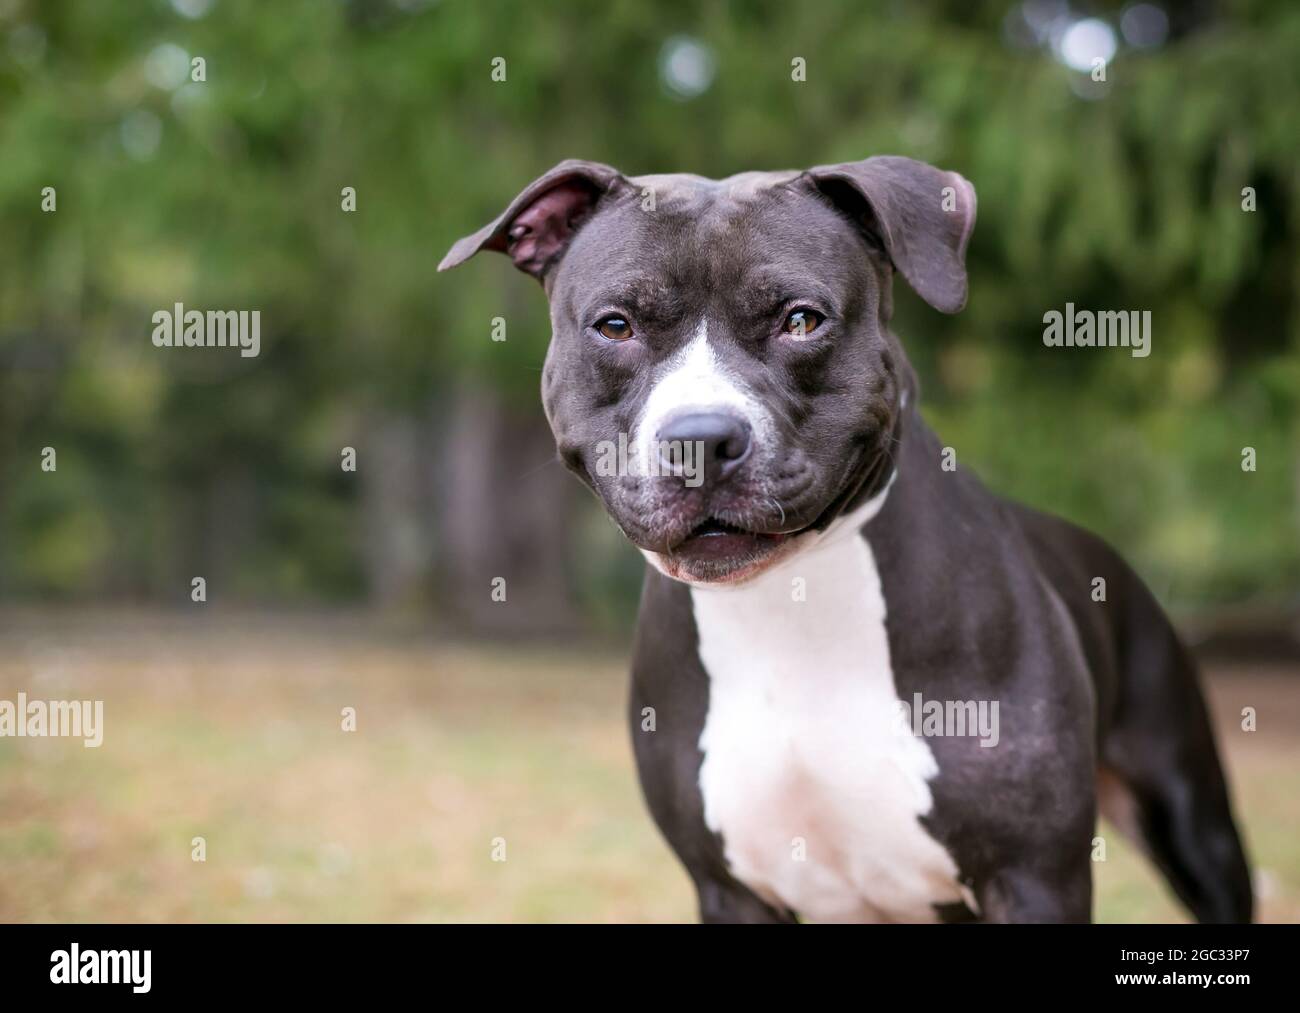 A black and white Pit Bull mixed breed dog with a smile on its face Stock Photo